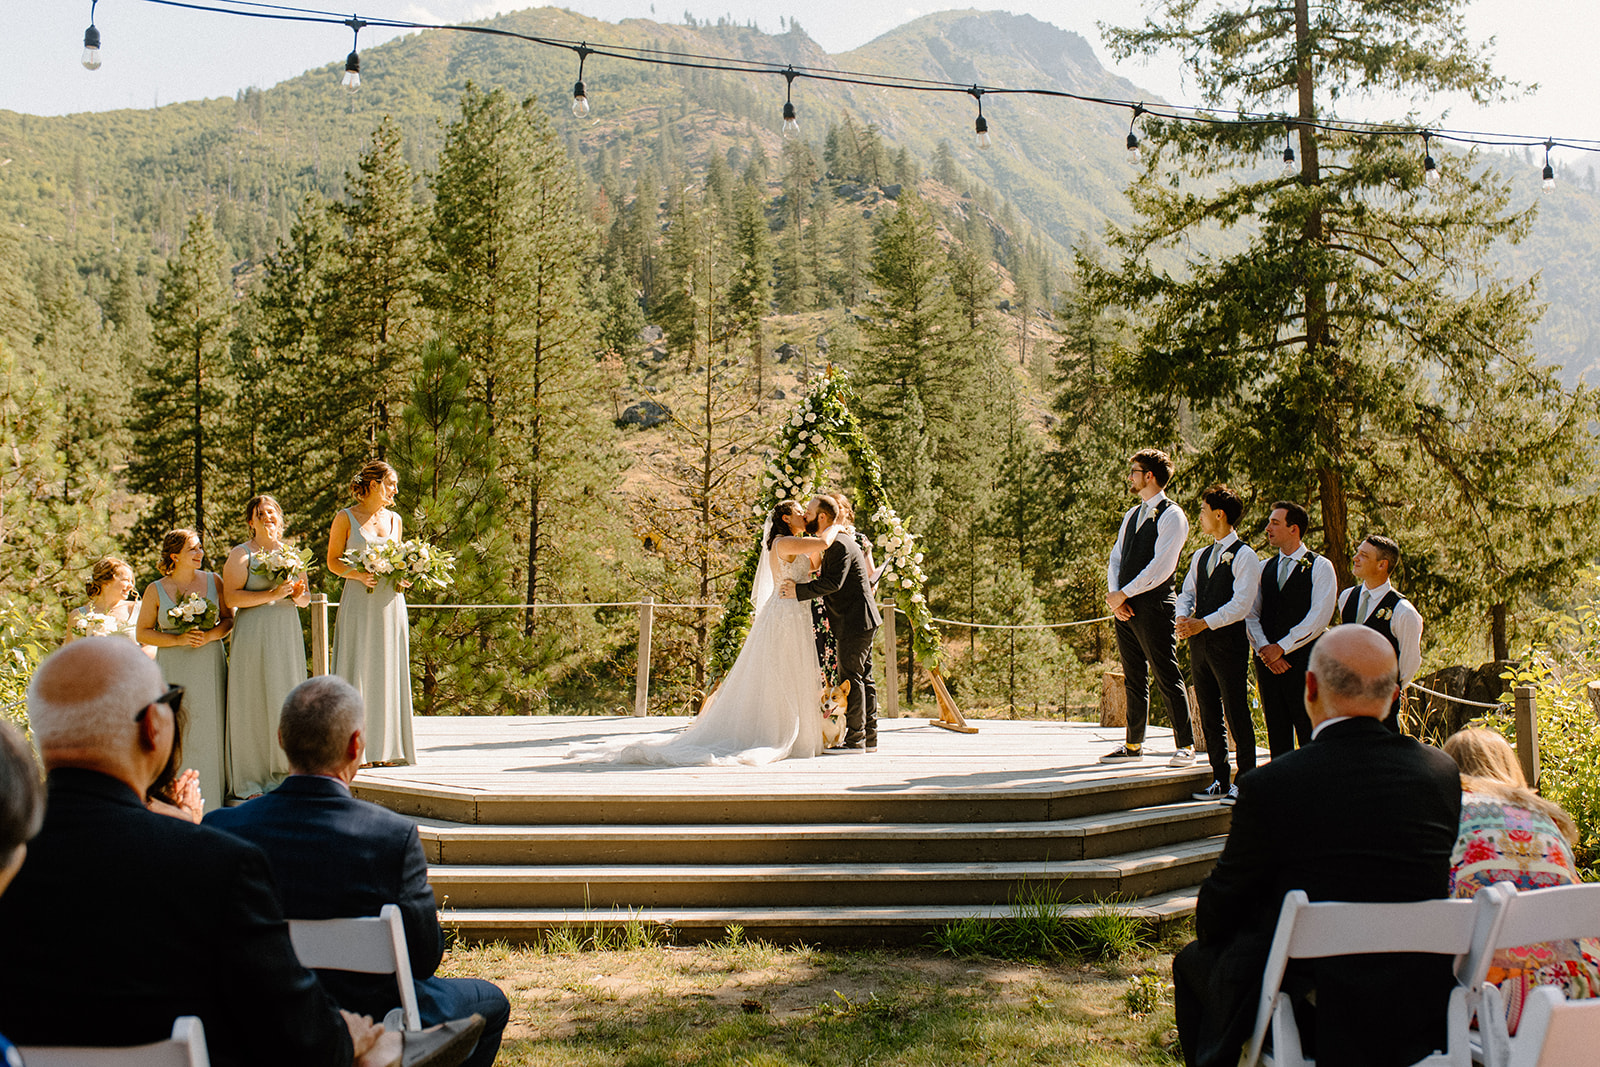 A Romantic Outdoor Wedding Day At The Sleeping Lady Resort